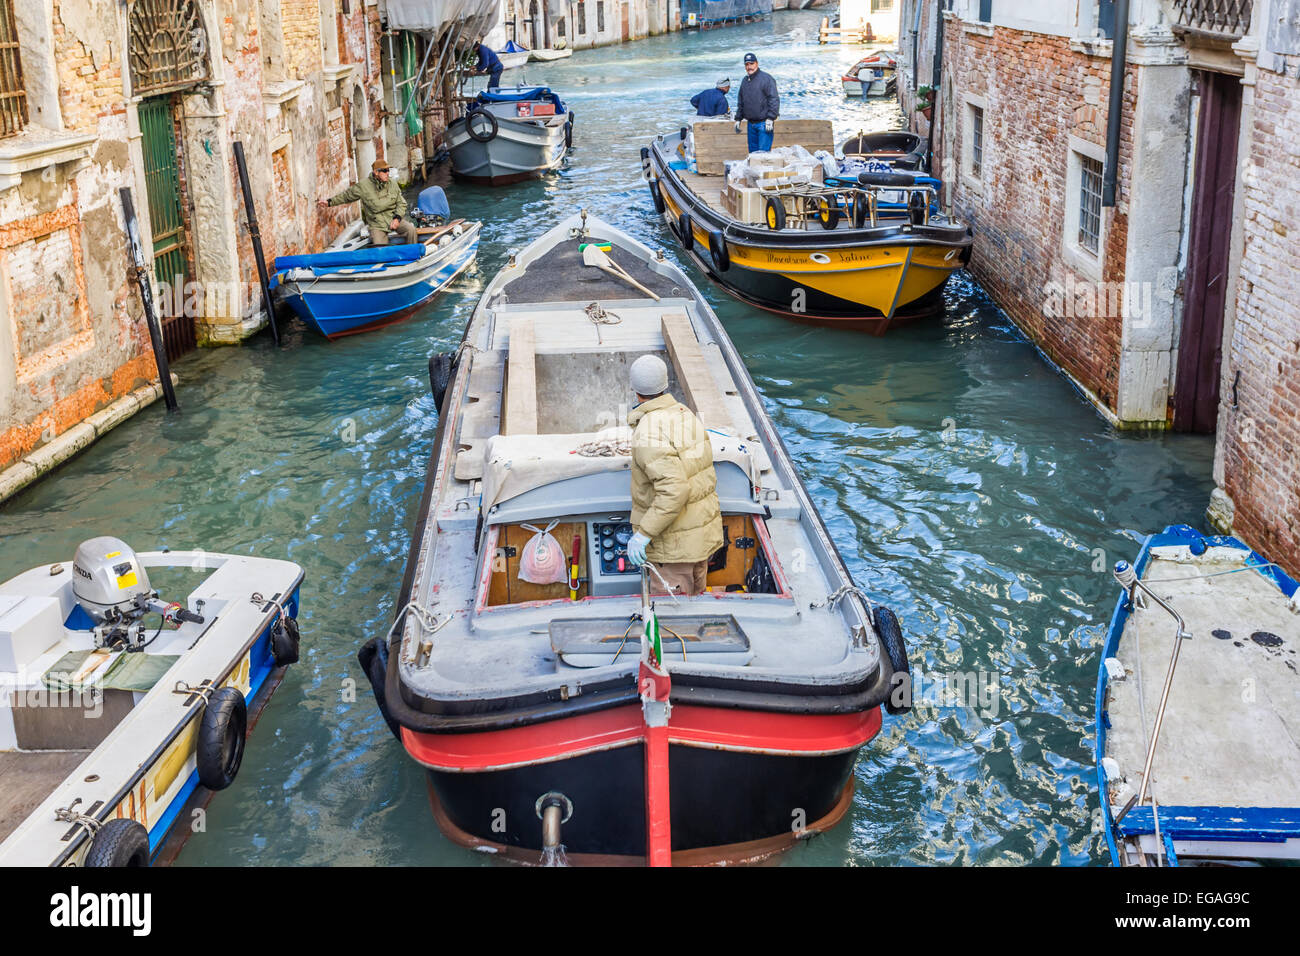 Two workboats on congested canal in Venice Stock Photo